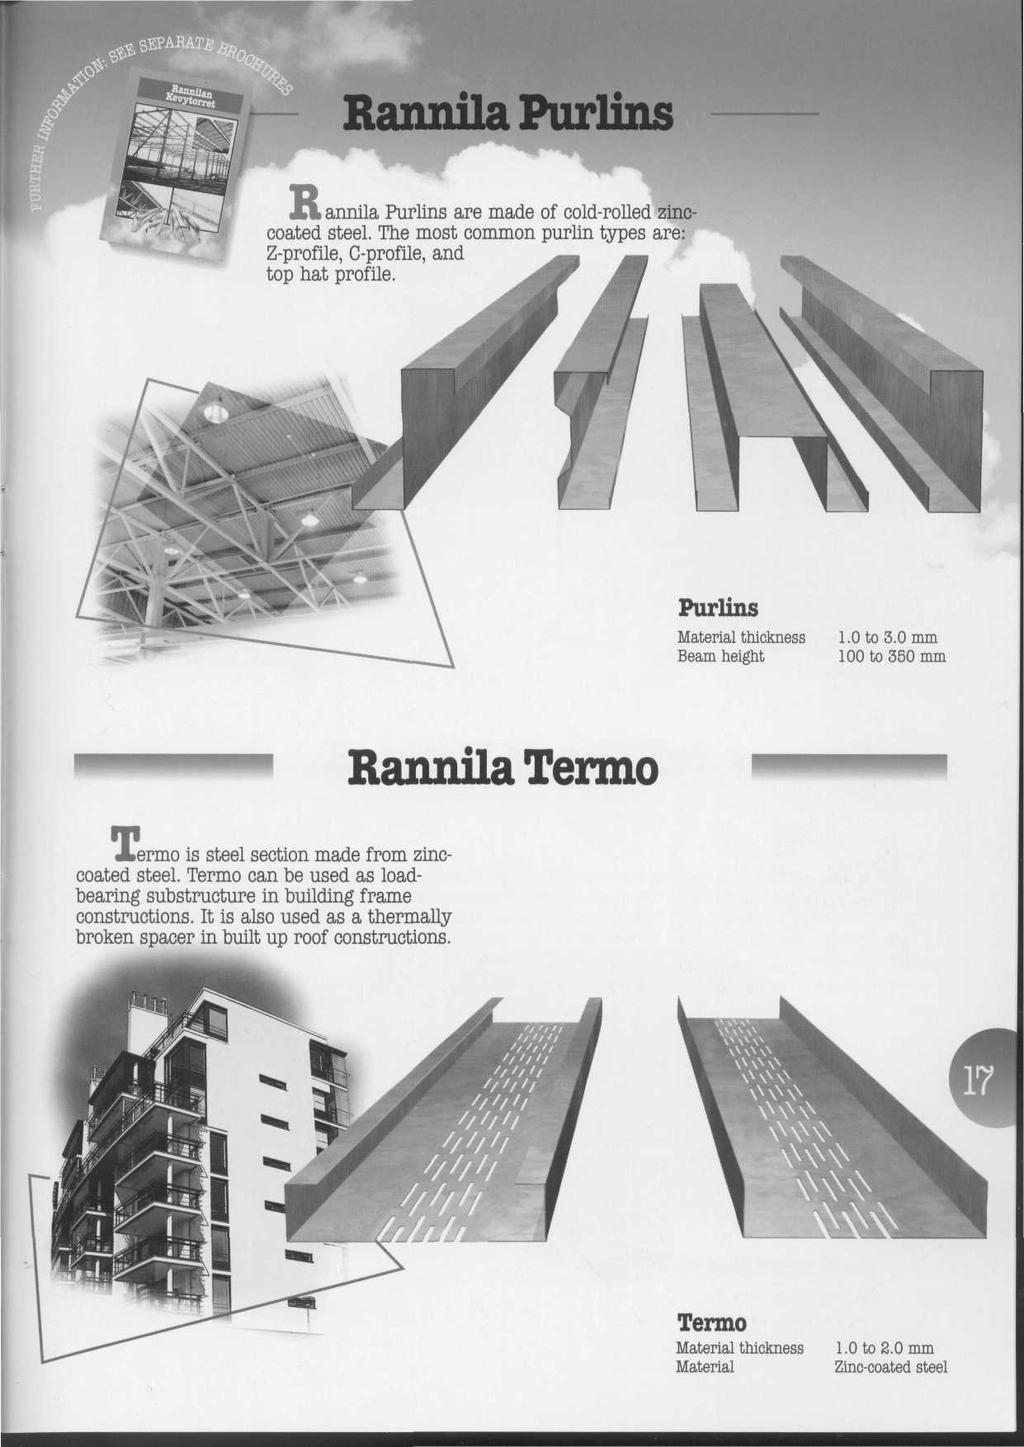 Rannila Purlins annila Purlins are made of cold-rolled zinc coated steel. The most common purlin types are: Z-profile, C-profile, and top hat profile. Purlins Material thickness Beam height 1.0 to 3.